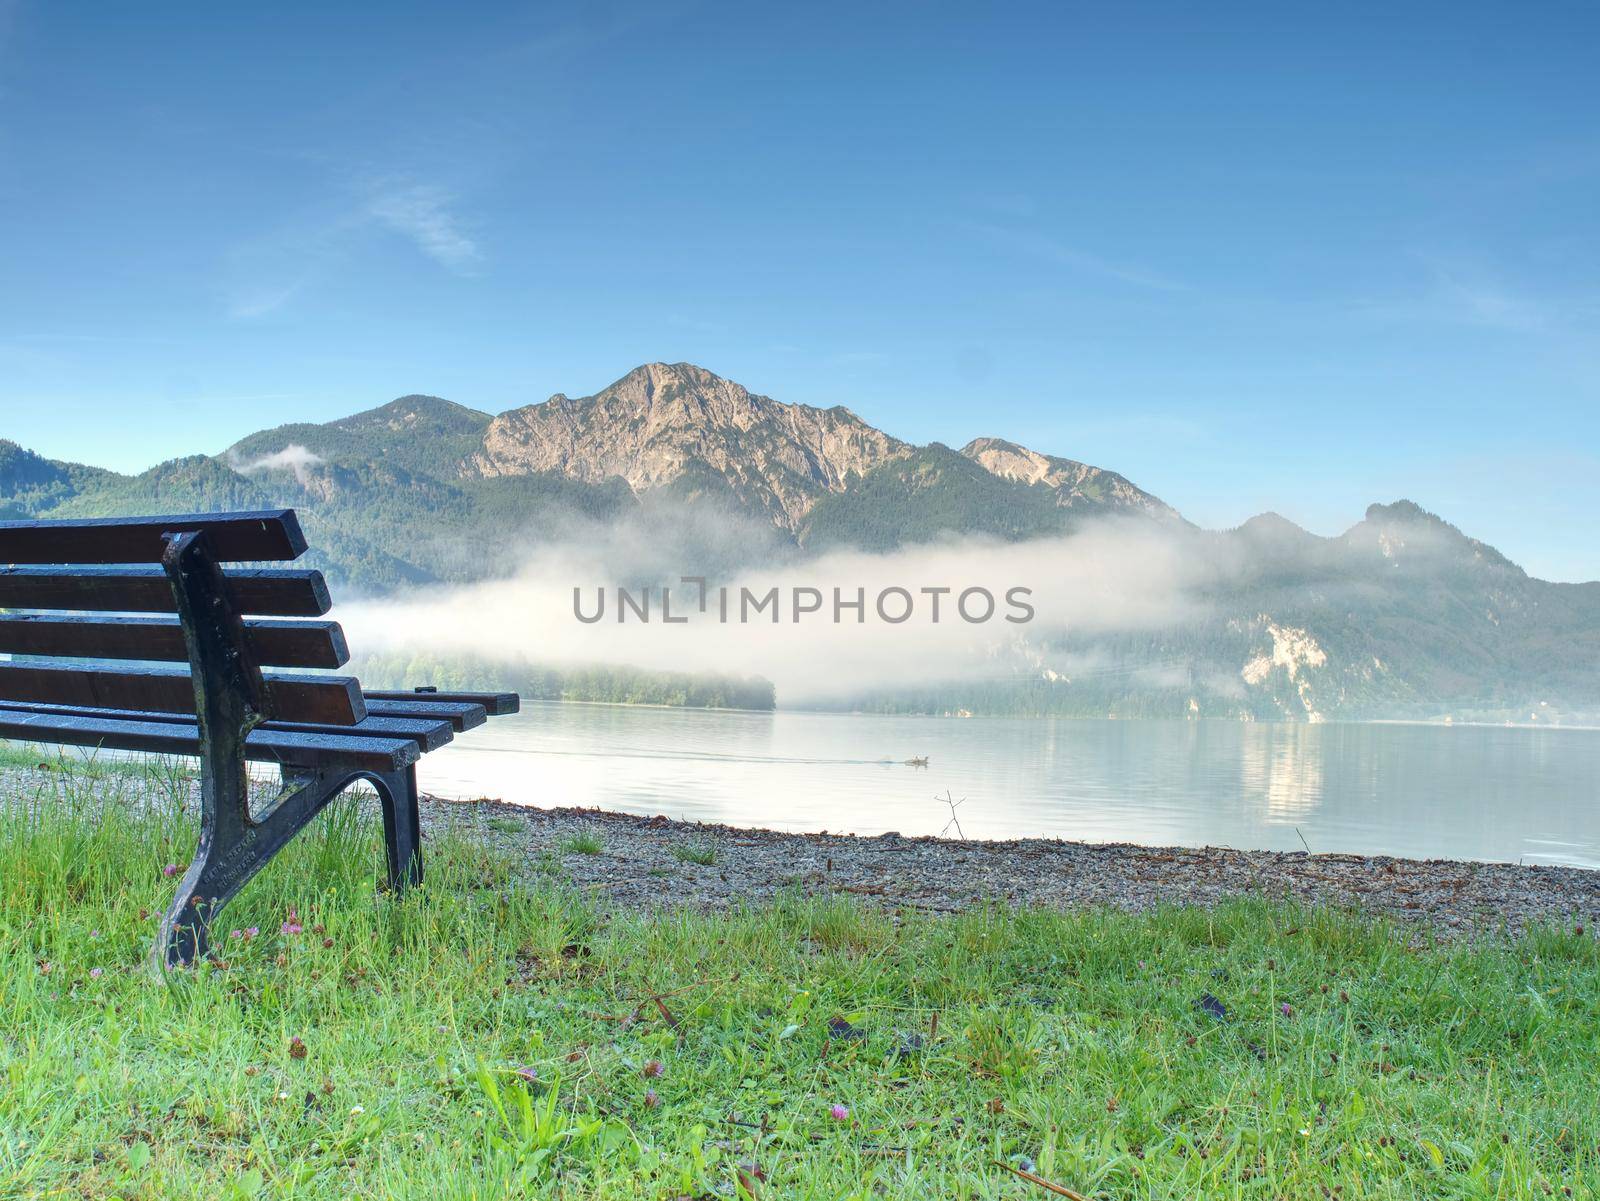 View of lake landscape with a bench in the foreground ready to relax. Coast under bended tree s.